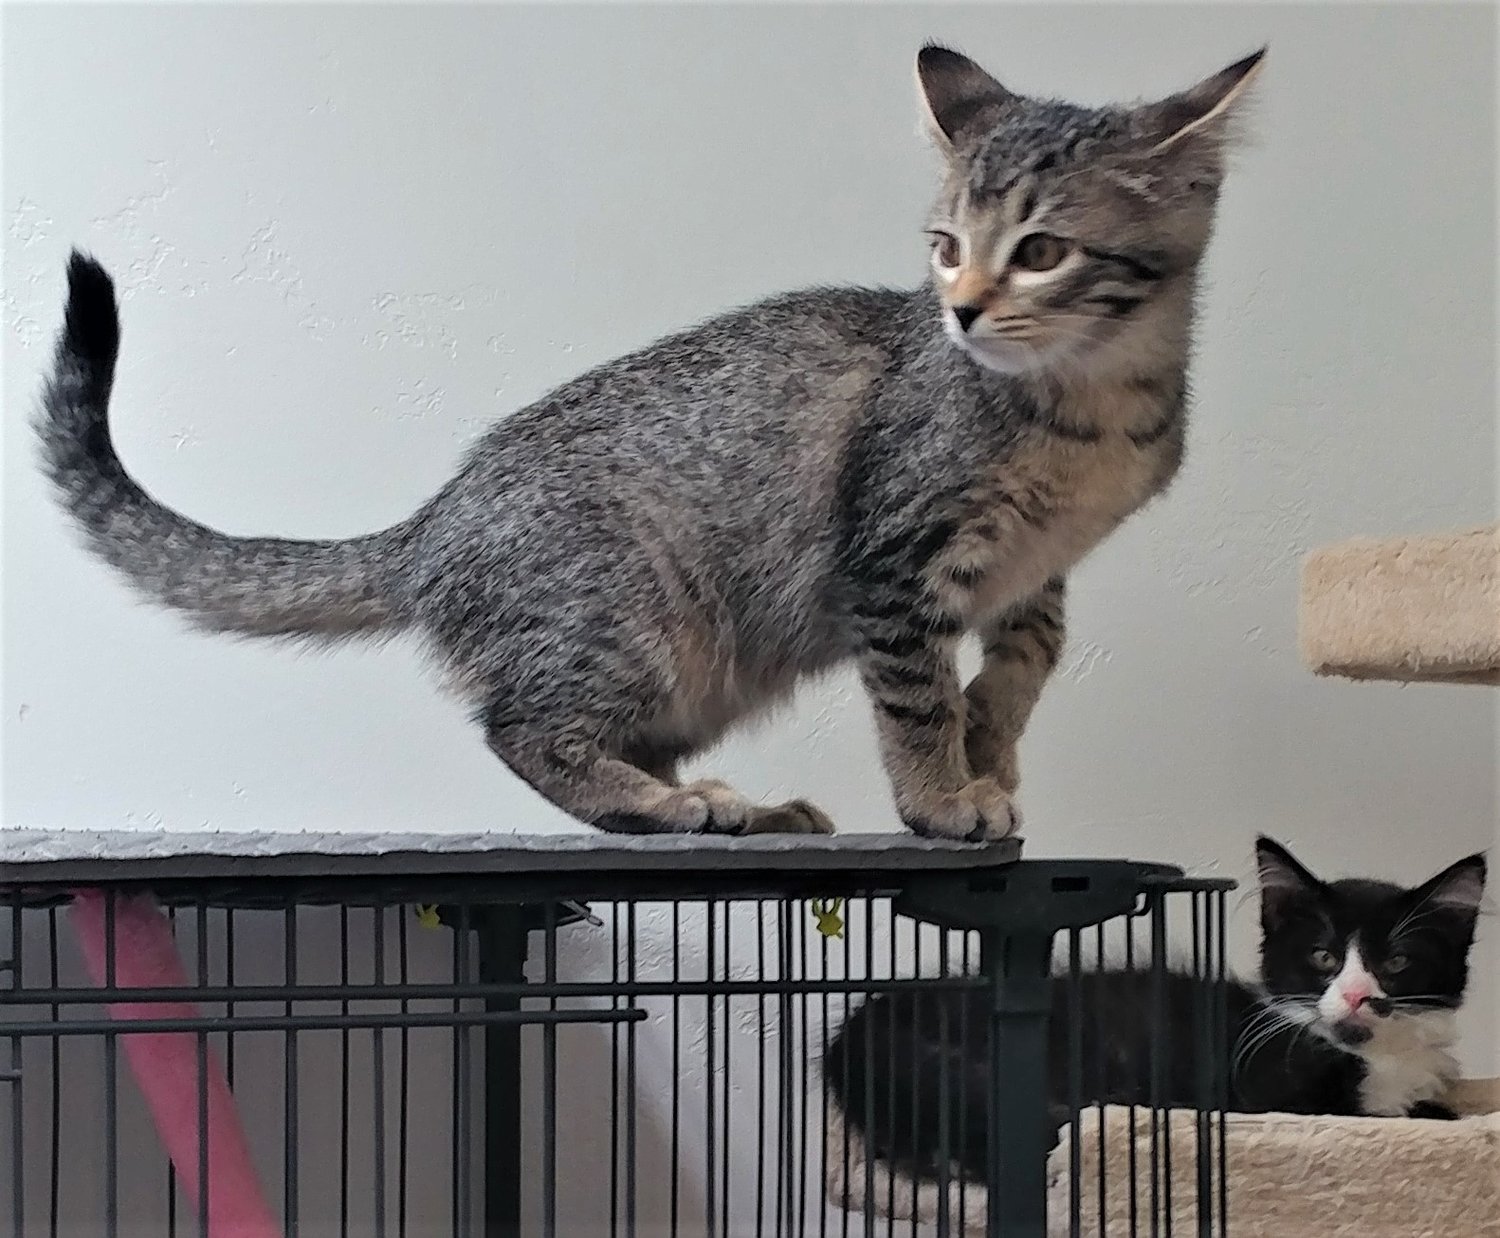 Many cats, kittens and dogs are looking for their forever homes at ACTion Programs for Animals.